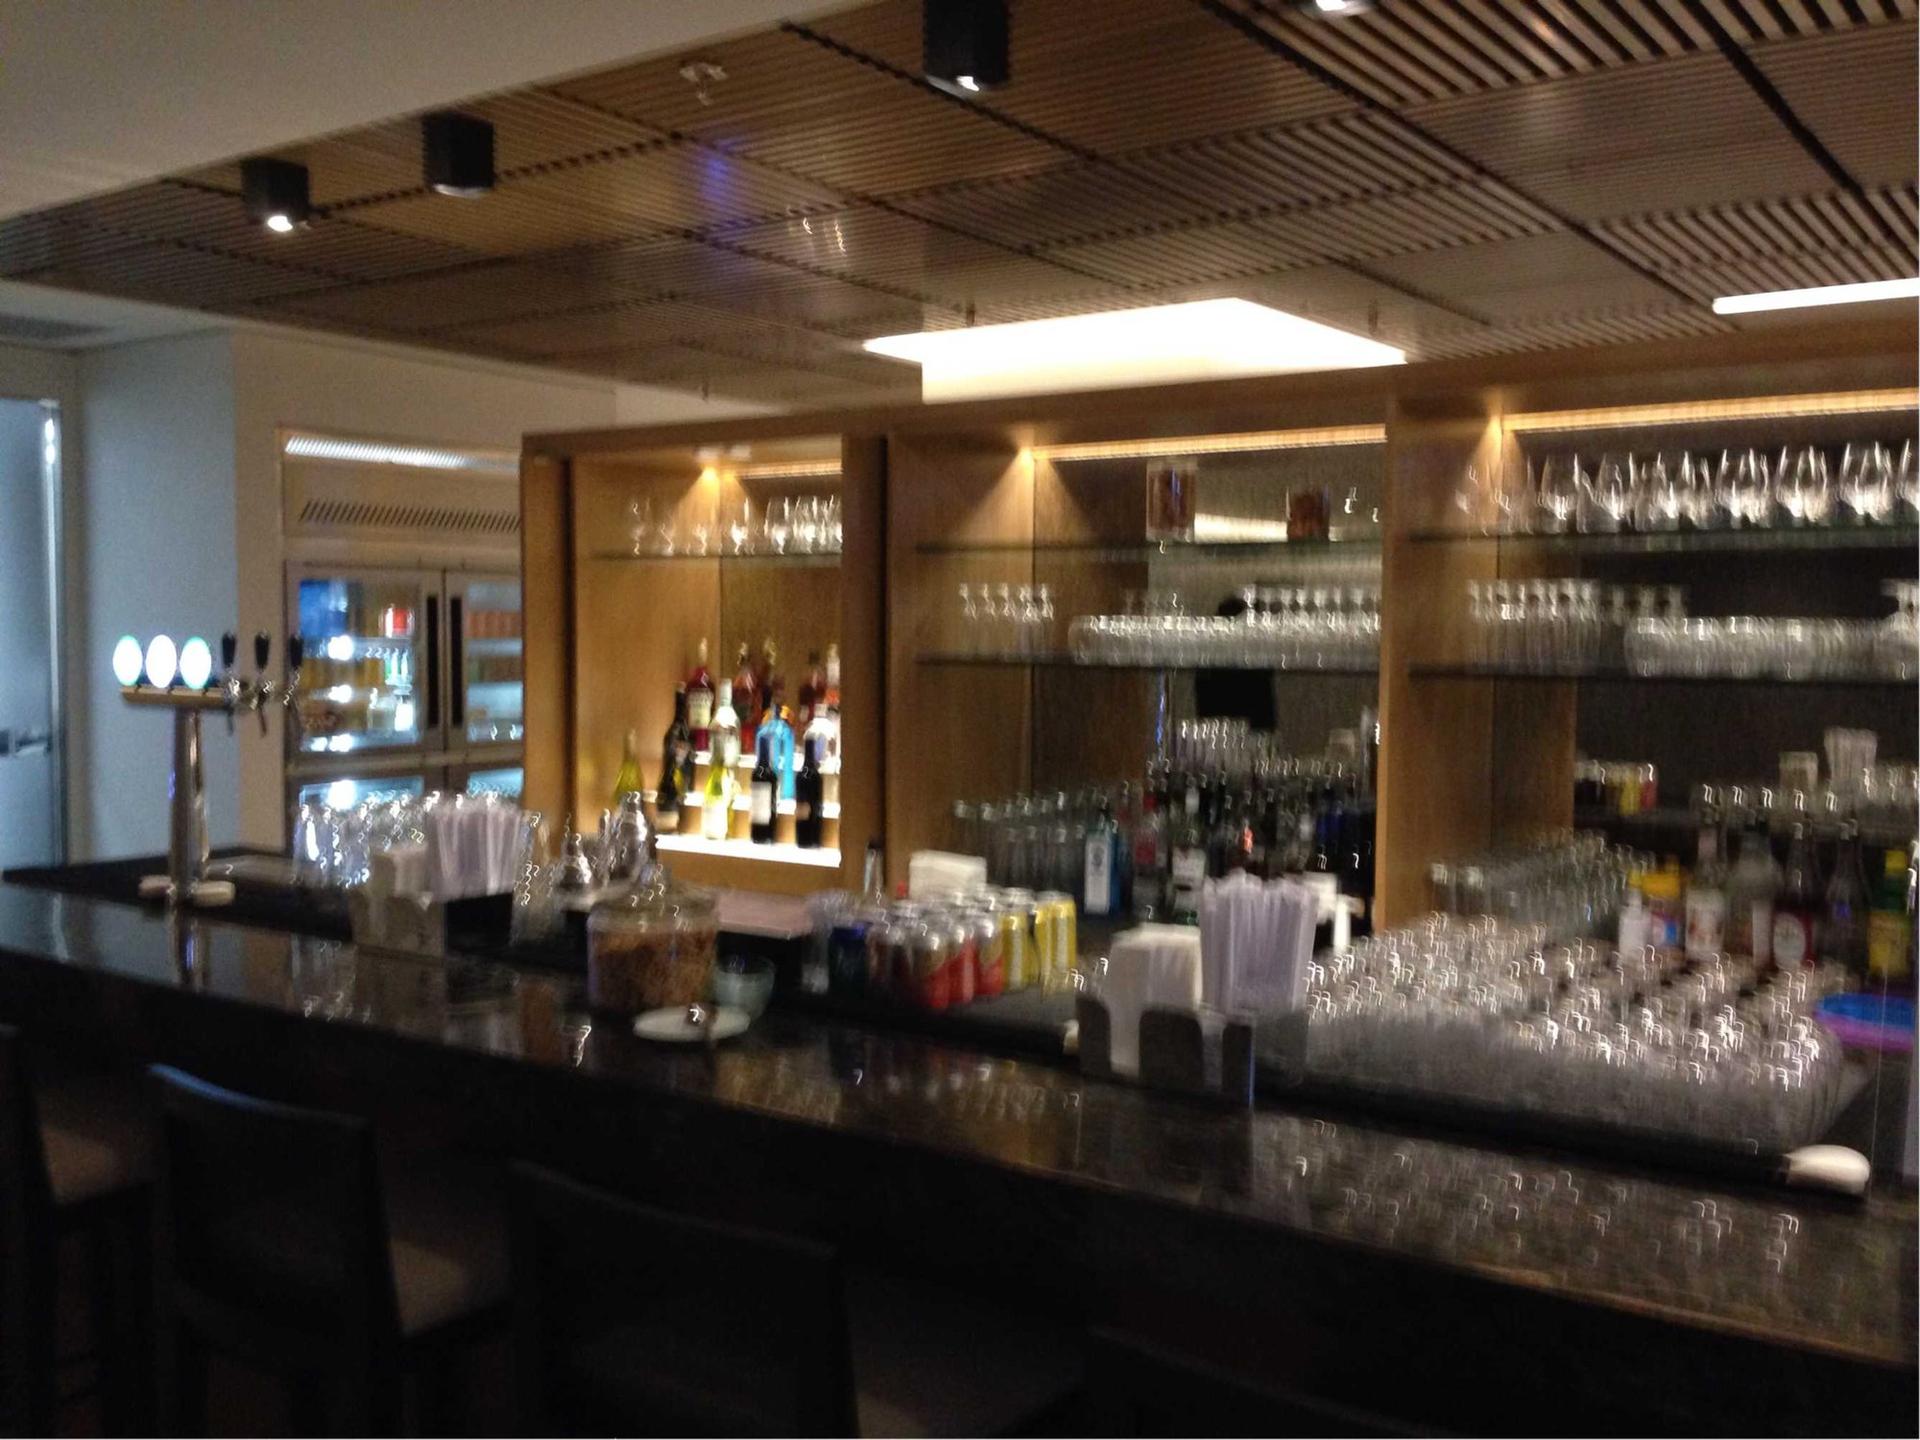 Singapore Airlines SilverKris Business Class Lounge image 30 of 68